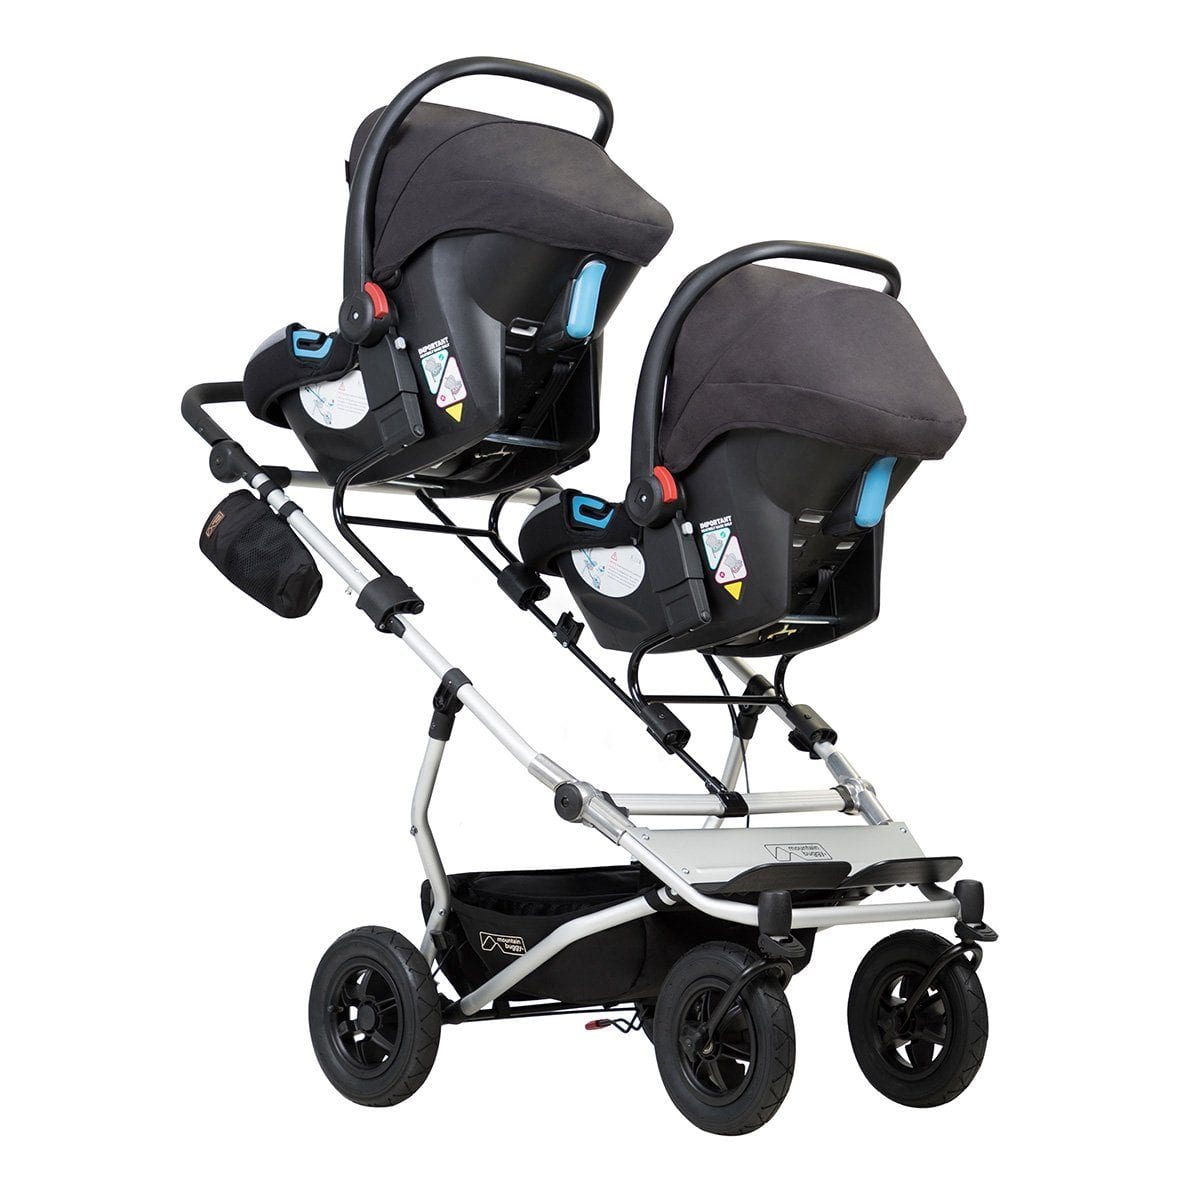 pushchairs with car seats included